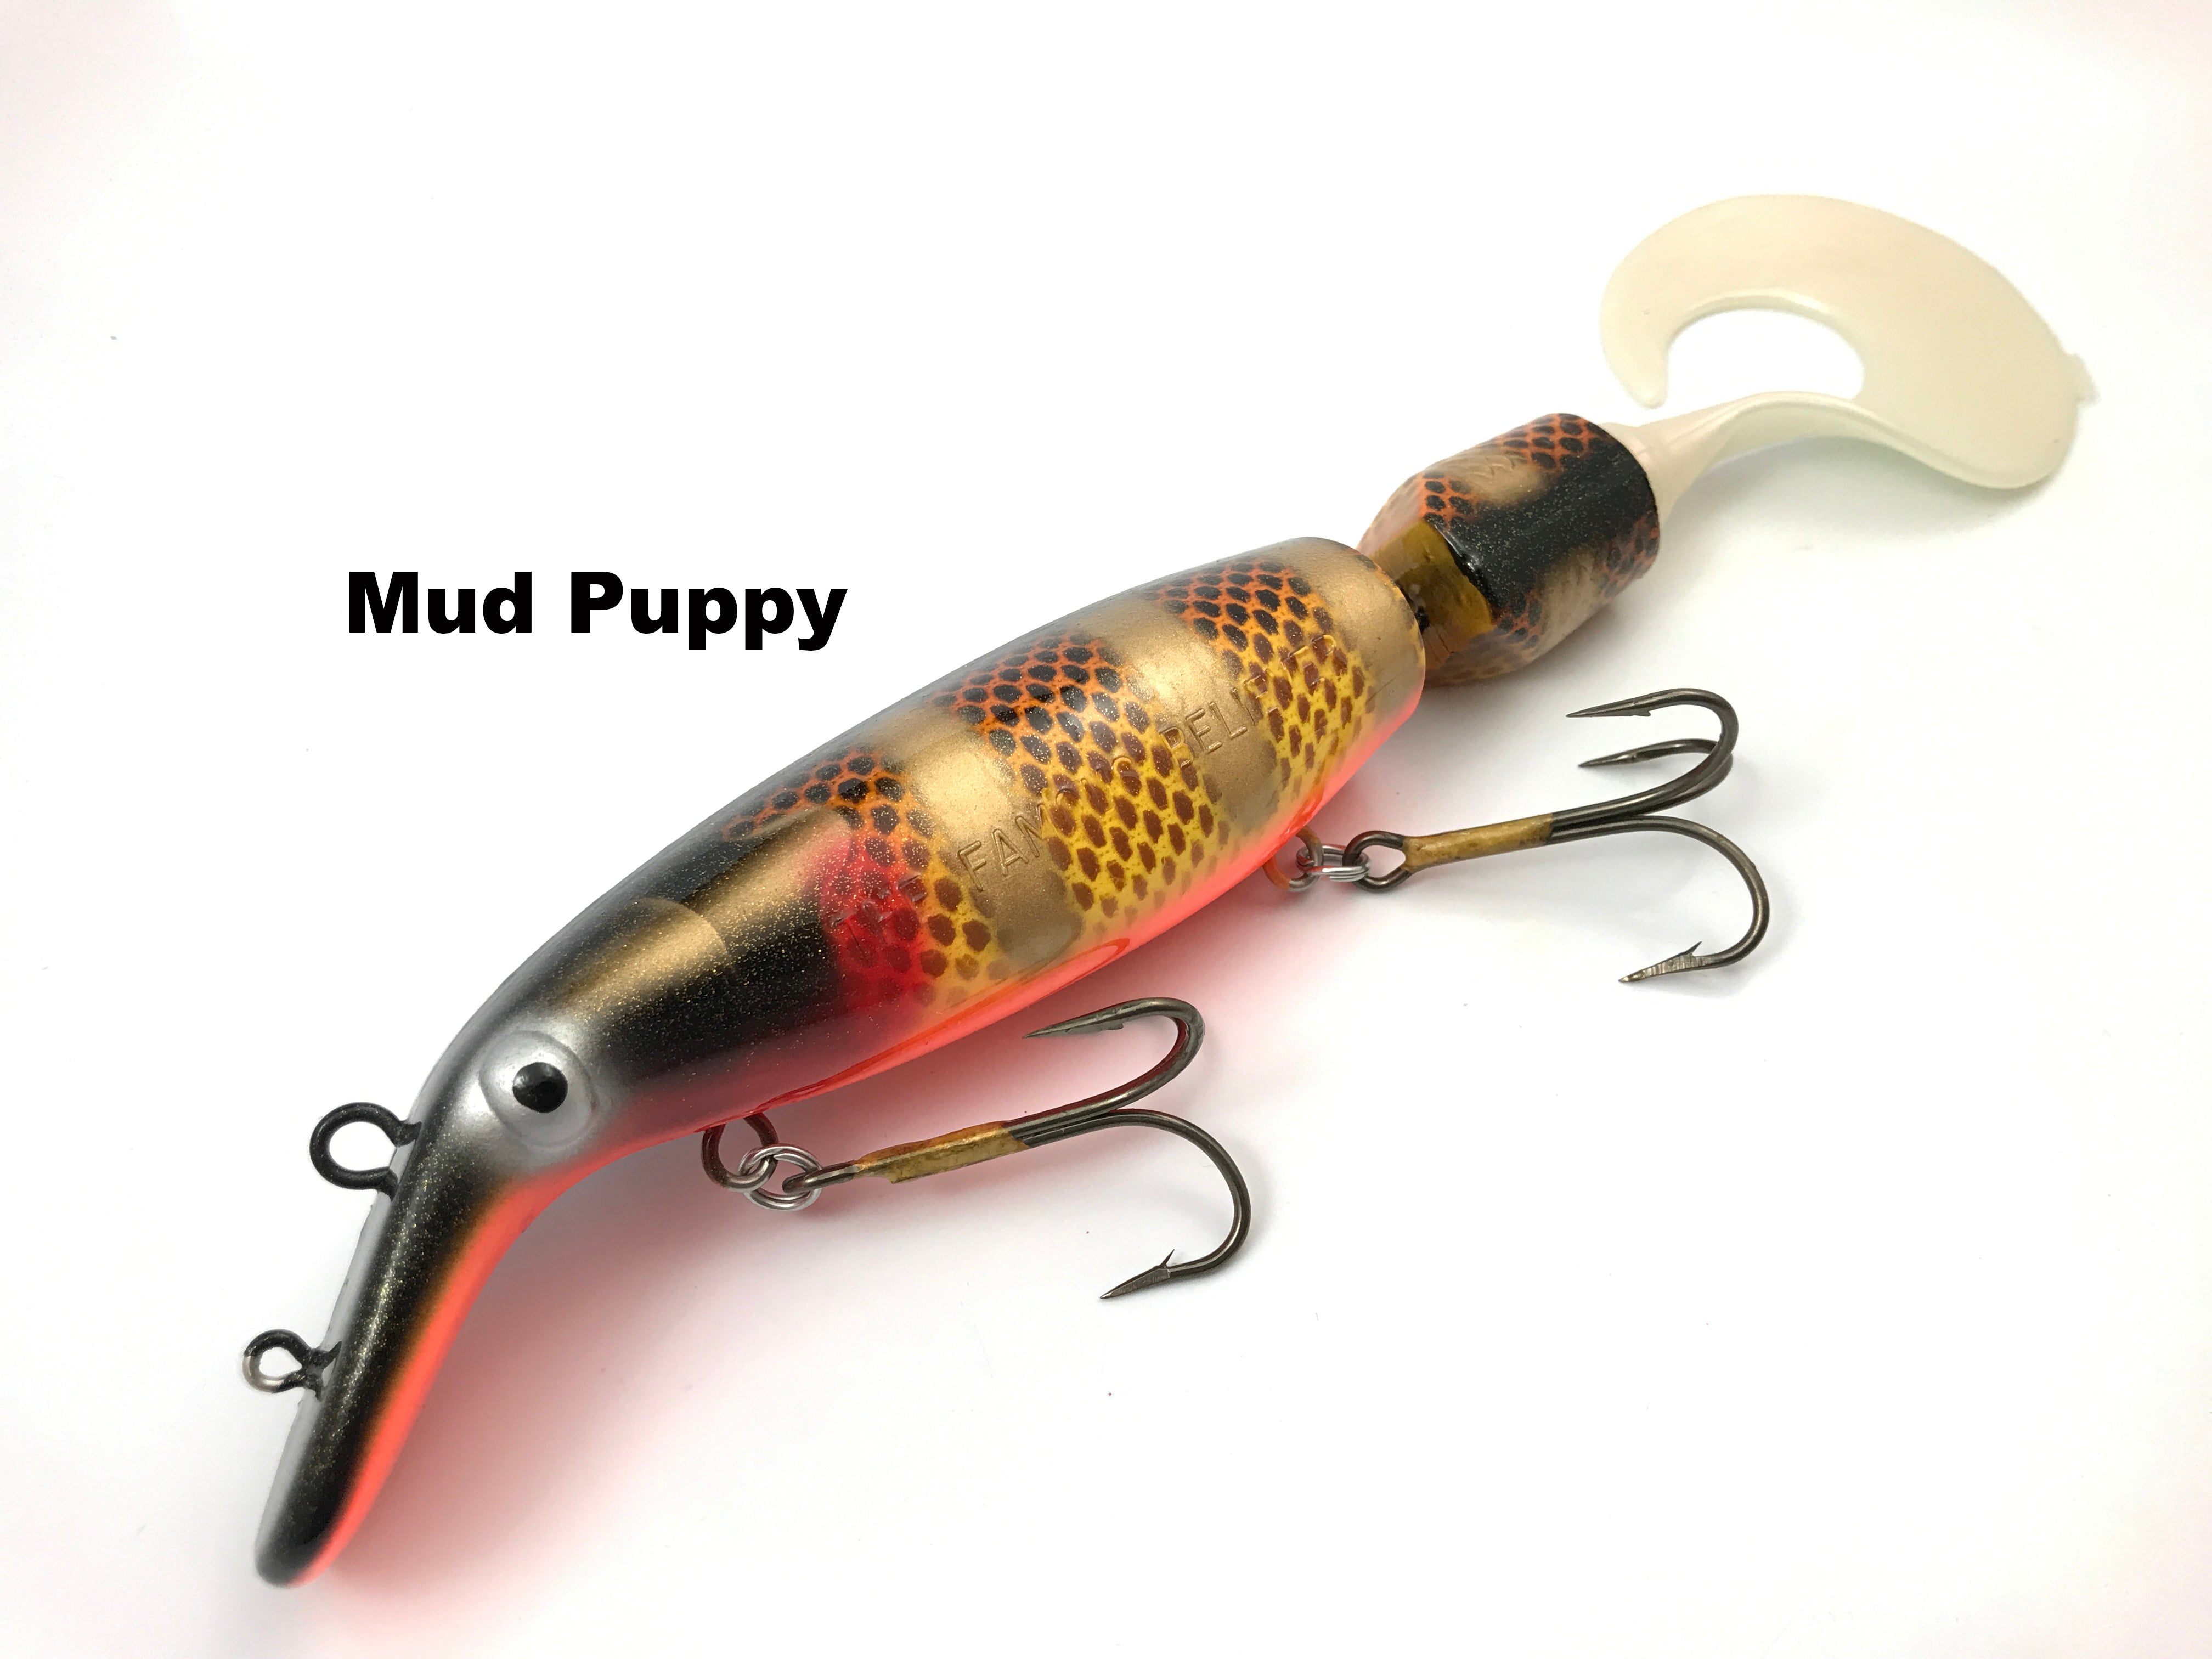 Drifter Believer Muskie Straight Tail Lure 8 Halo Hot Walley